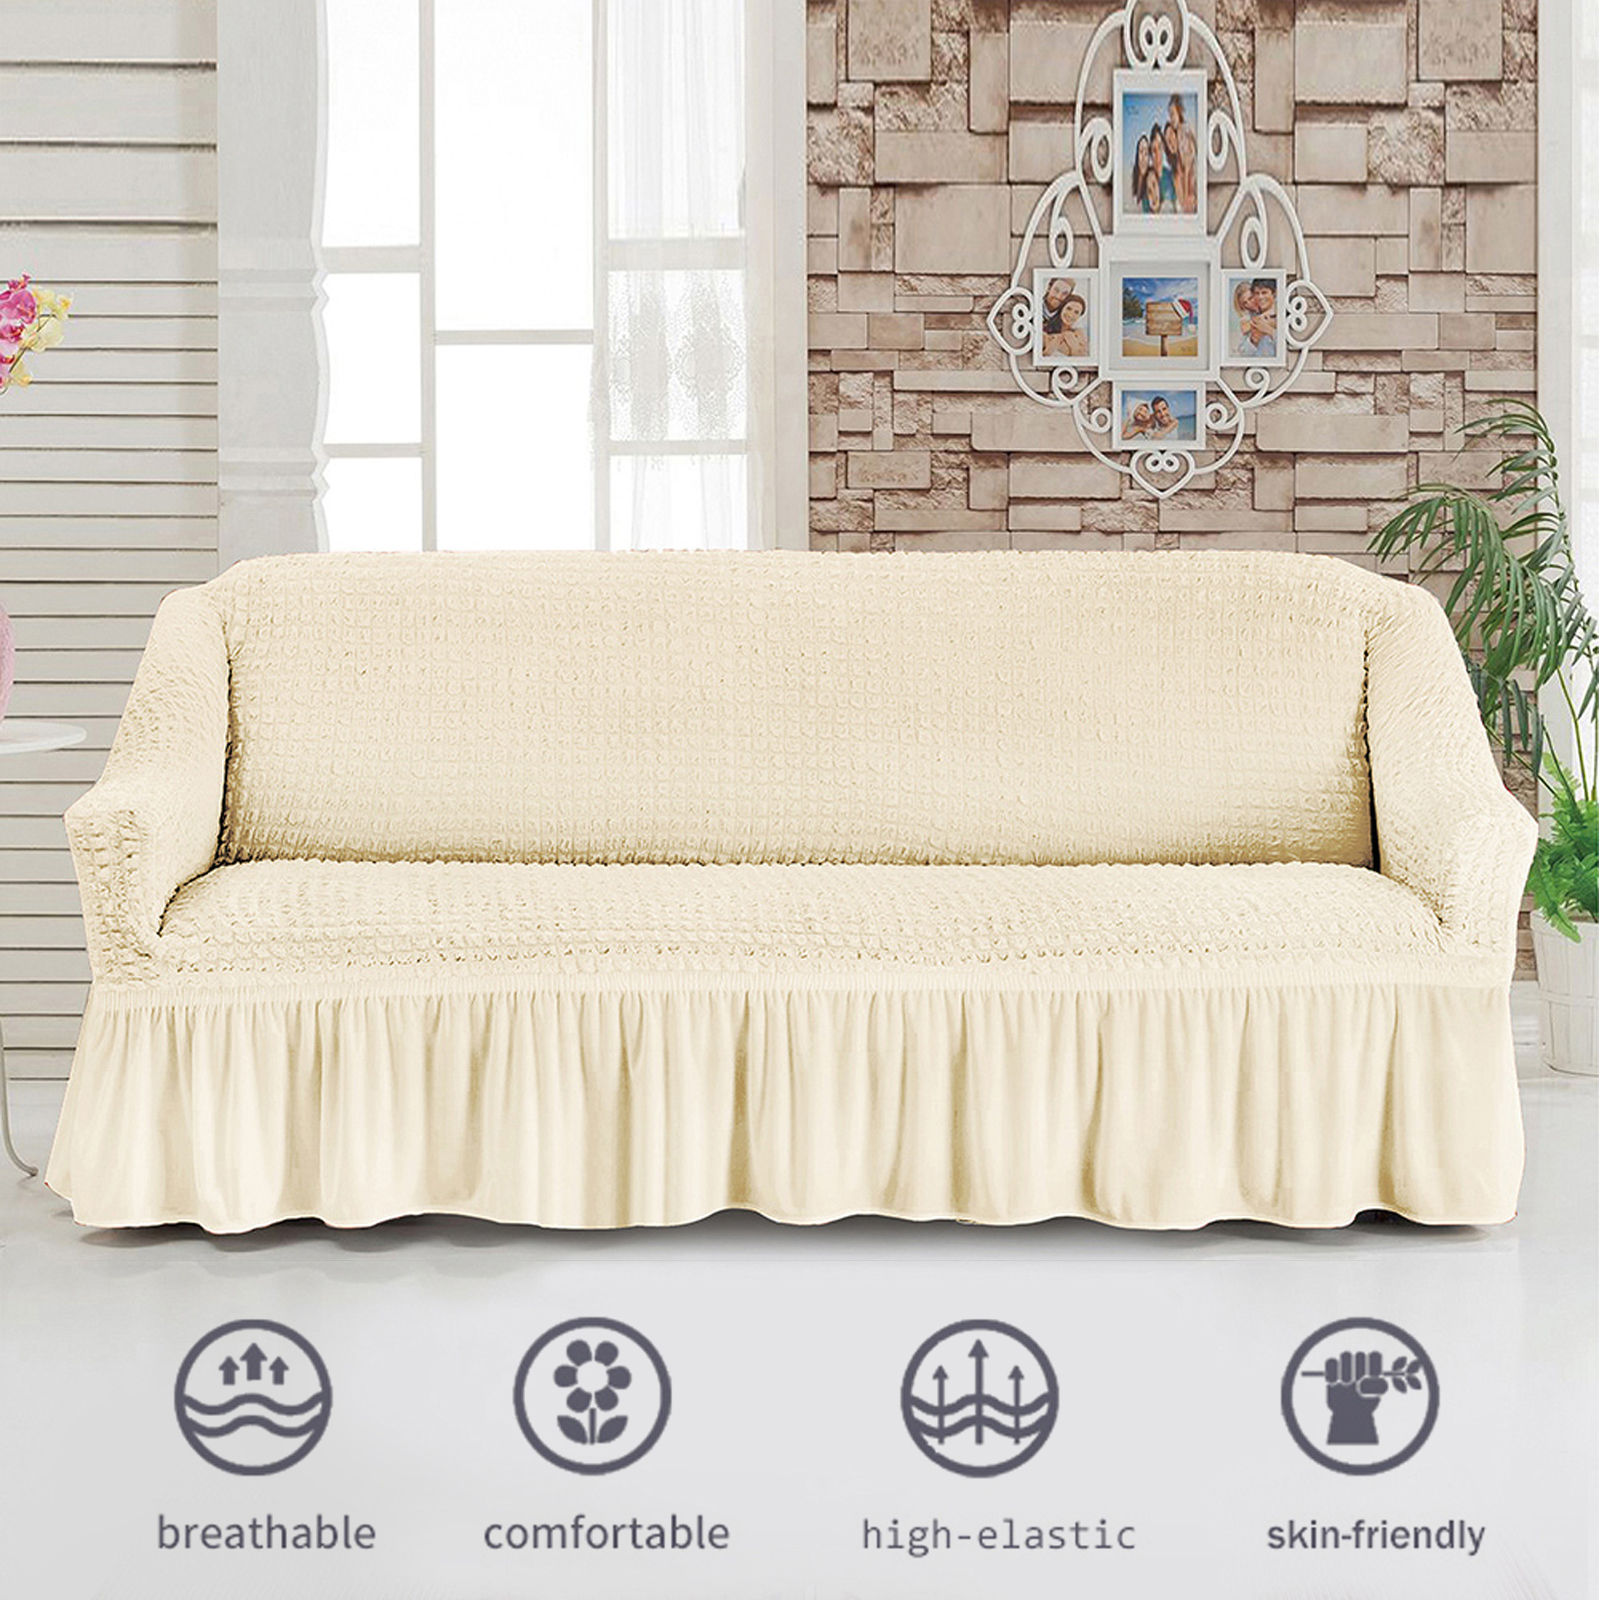 Stretch Sofa Slipcover, 3 Seater Sofa Slipcovers With Skirt With Armless Soft Sofa Cover Elastic Straps Sofa Slipcover For Living Room Kids Pets-white-Small